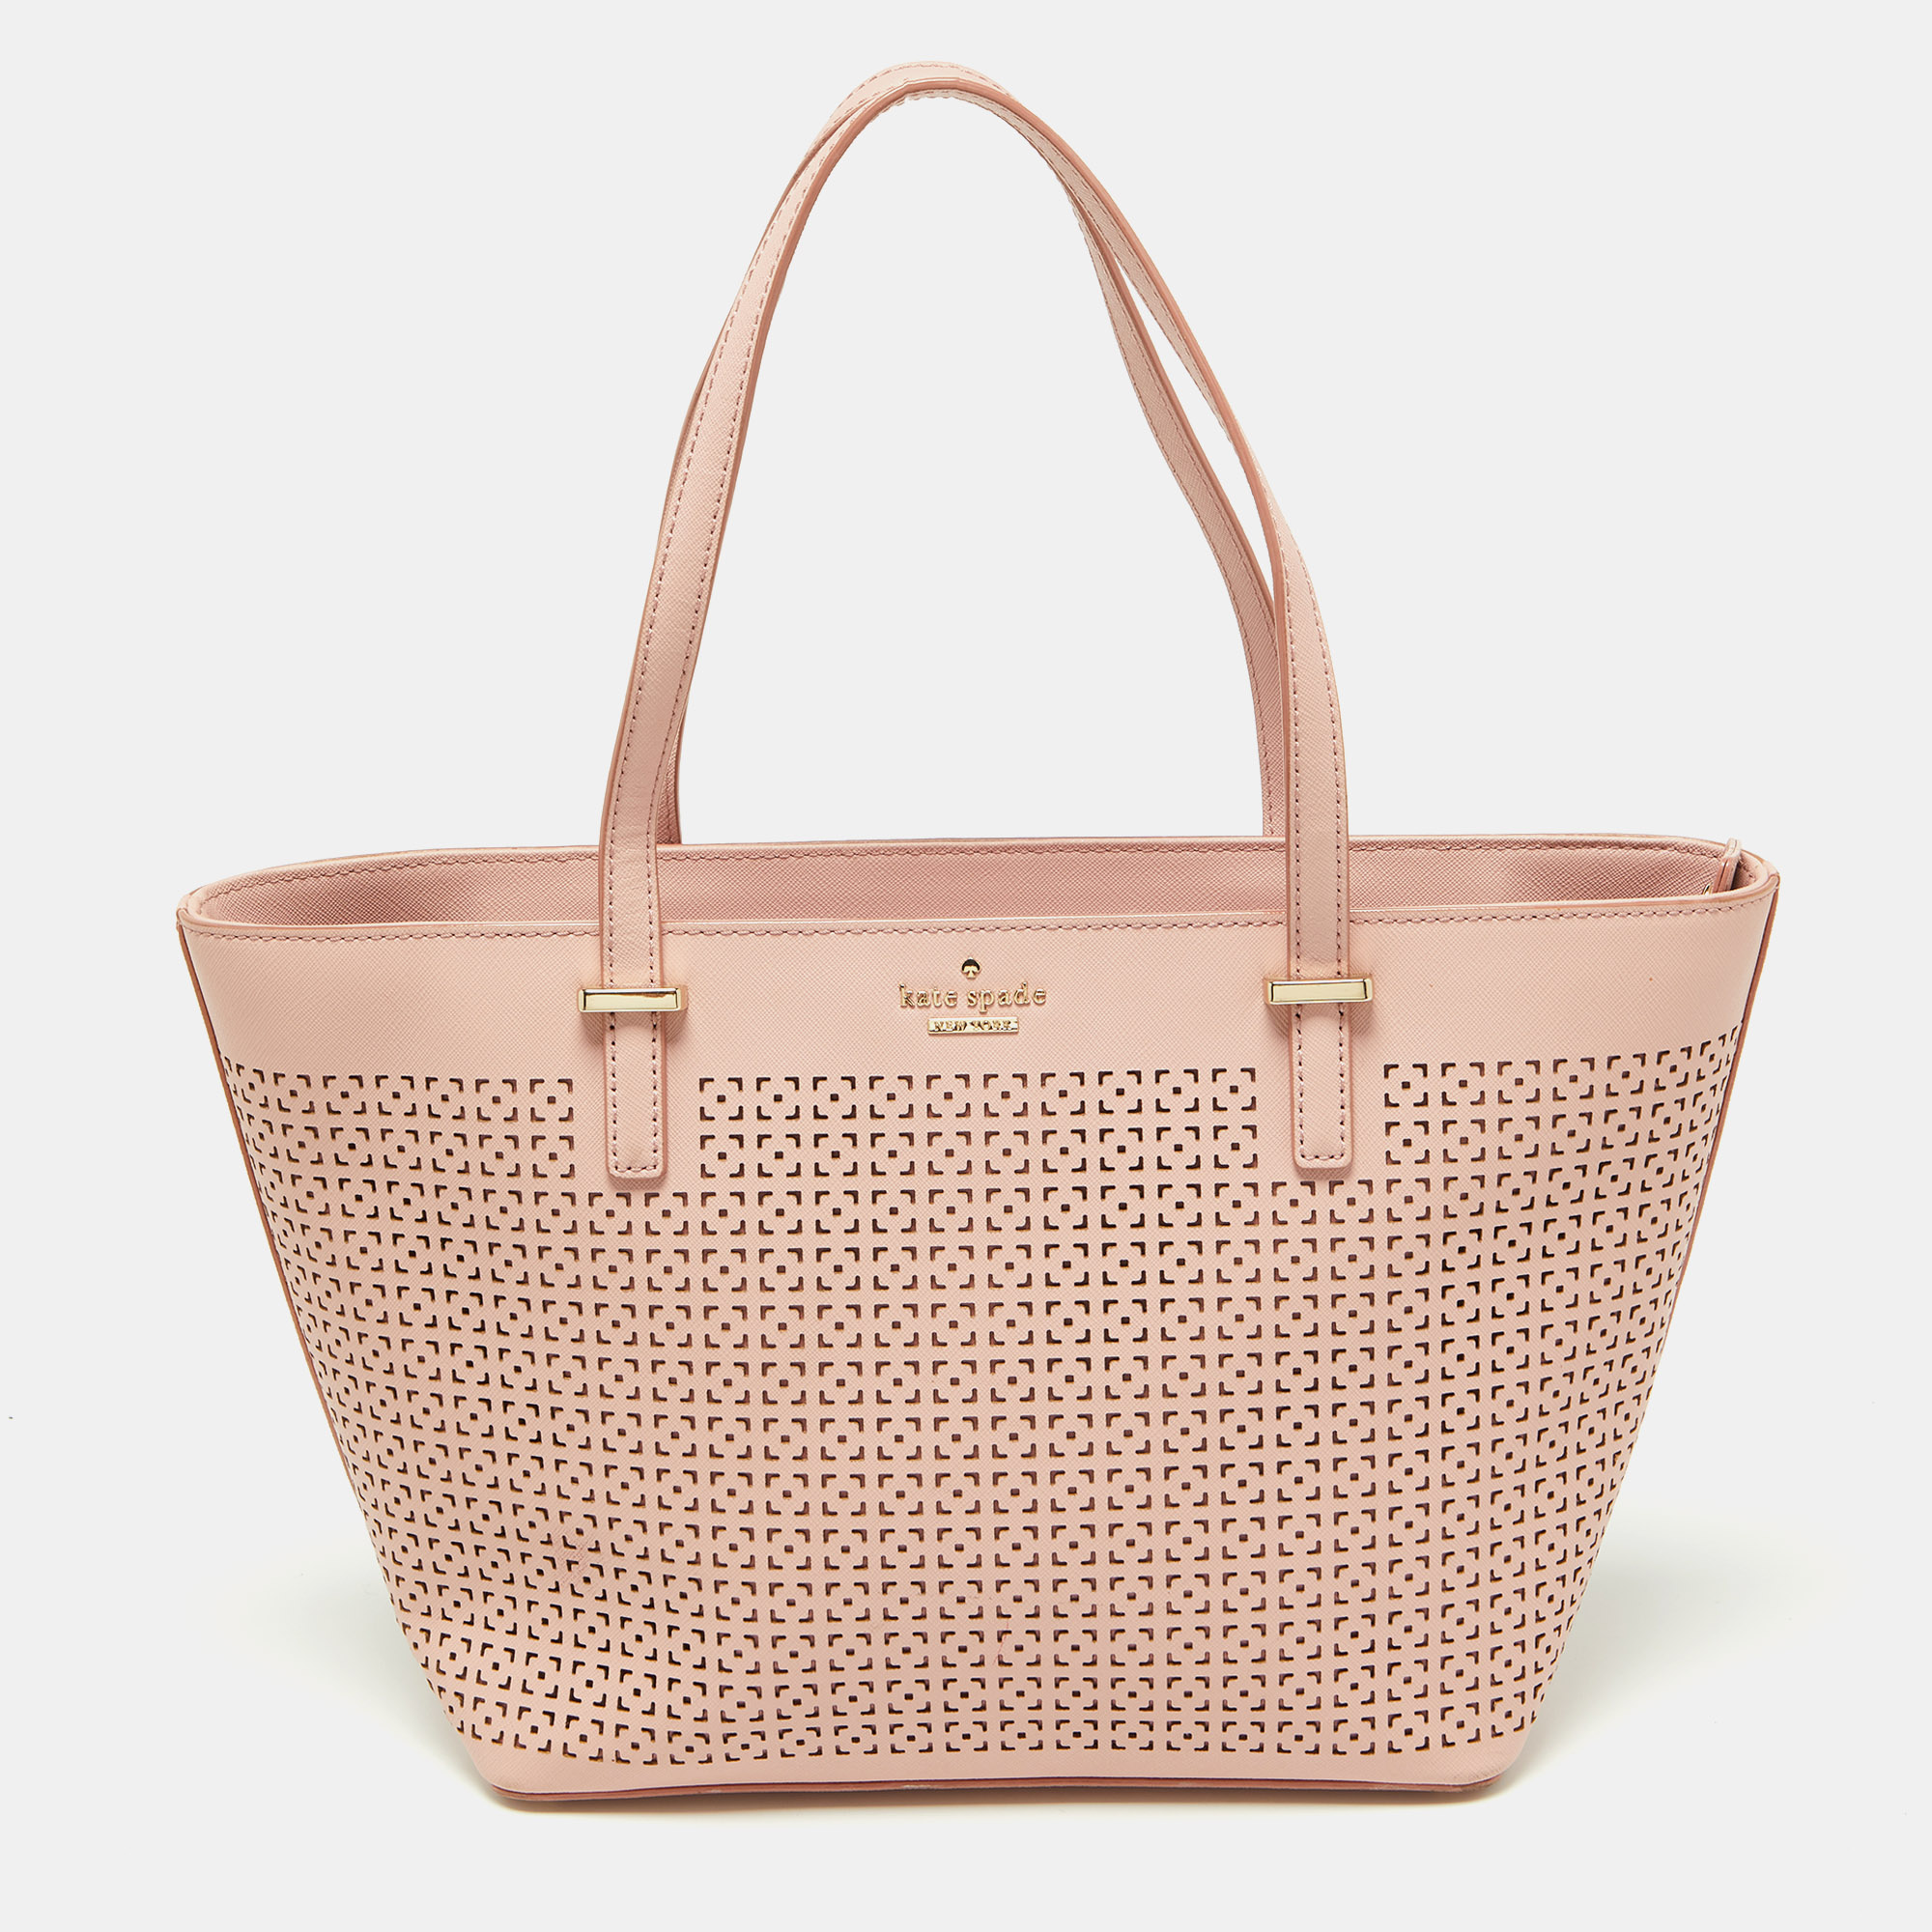 Kate Spade Pink Perforated Leather Cedar Street Harmony Tote